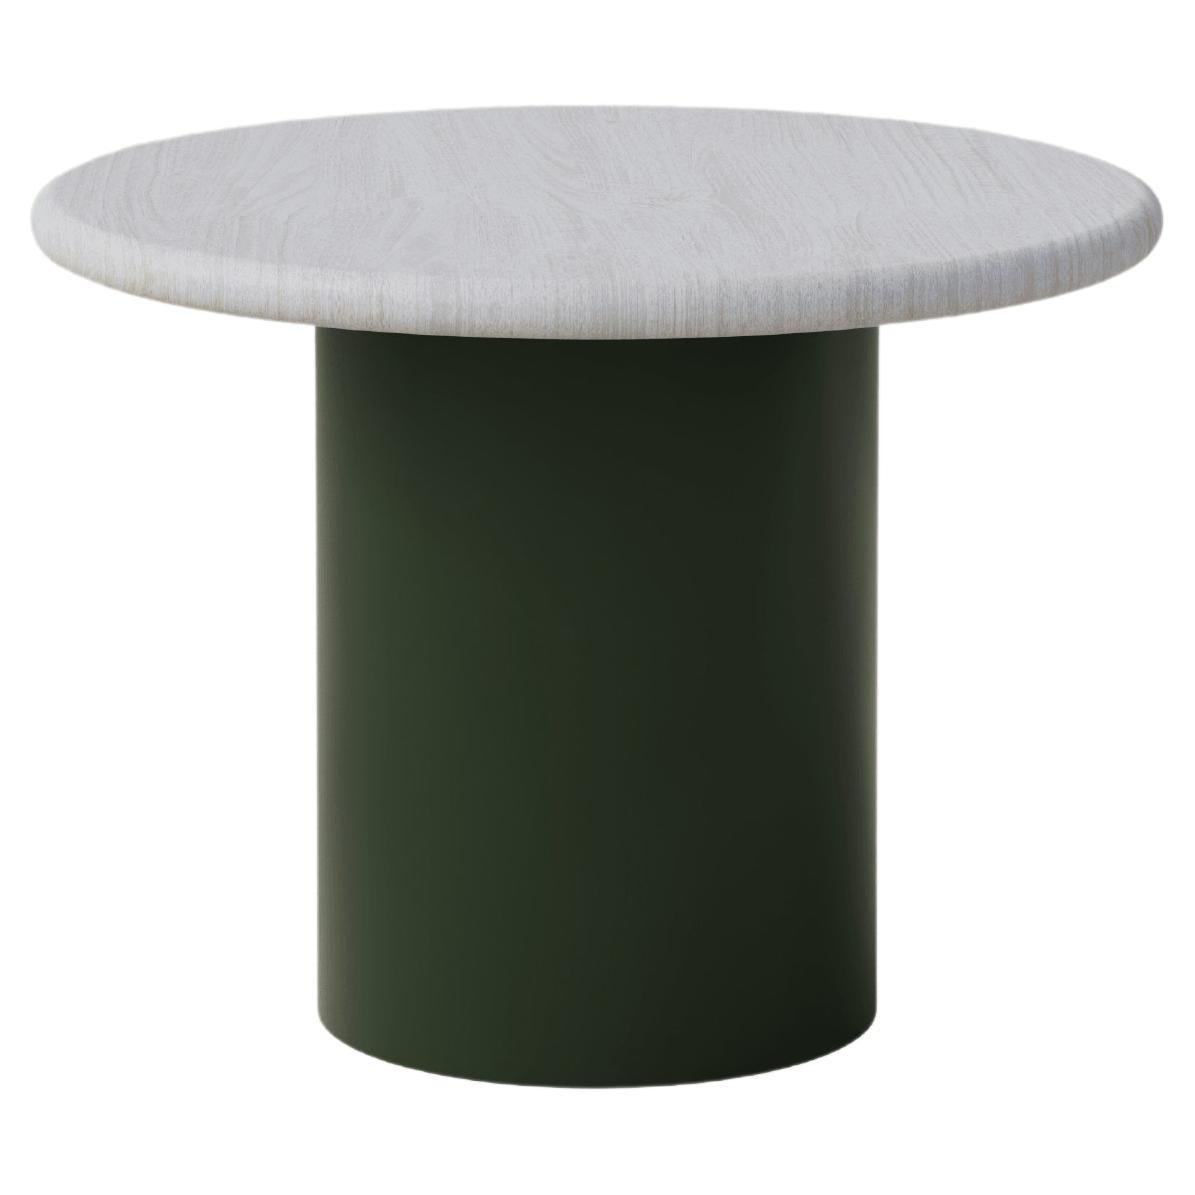 Raindrop Coffee Table, 500, White Oak / Moss Green For Sale